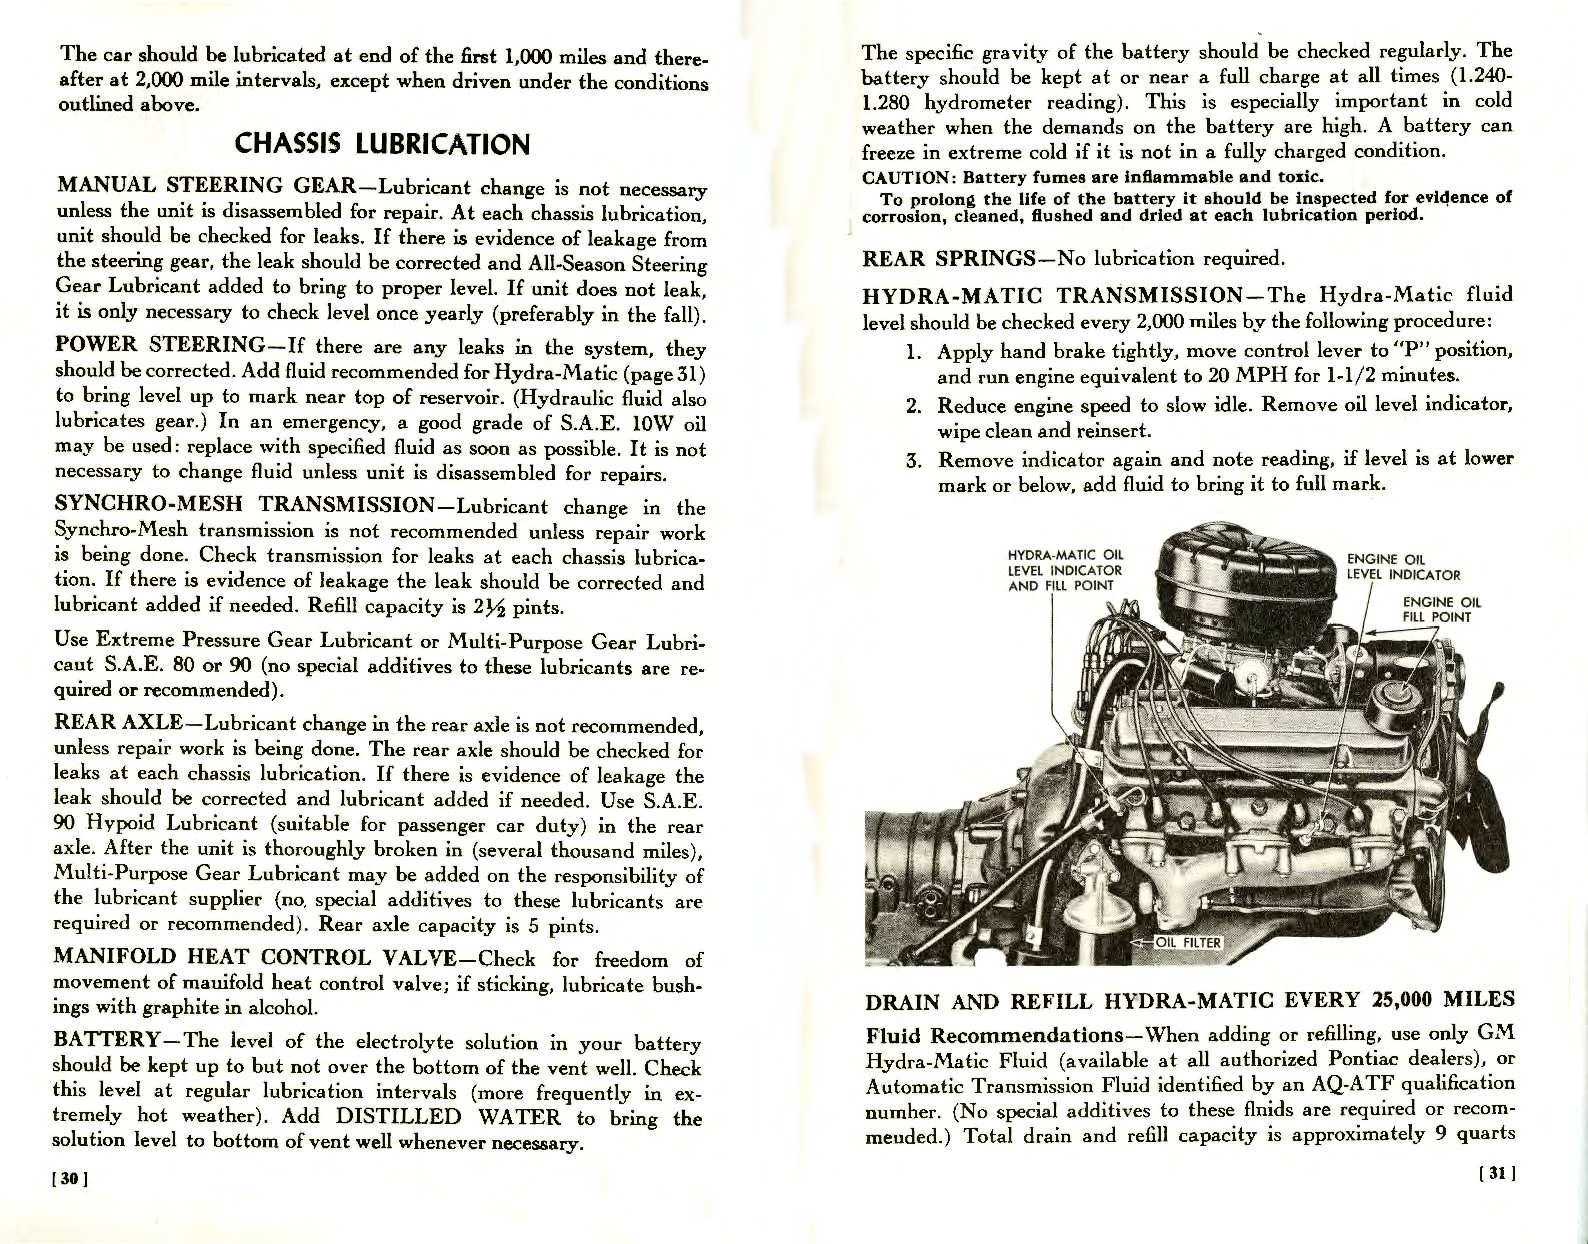 1957_Pontiac_Owners_Guide-30-31